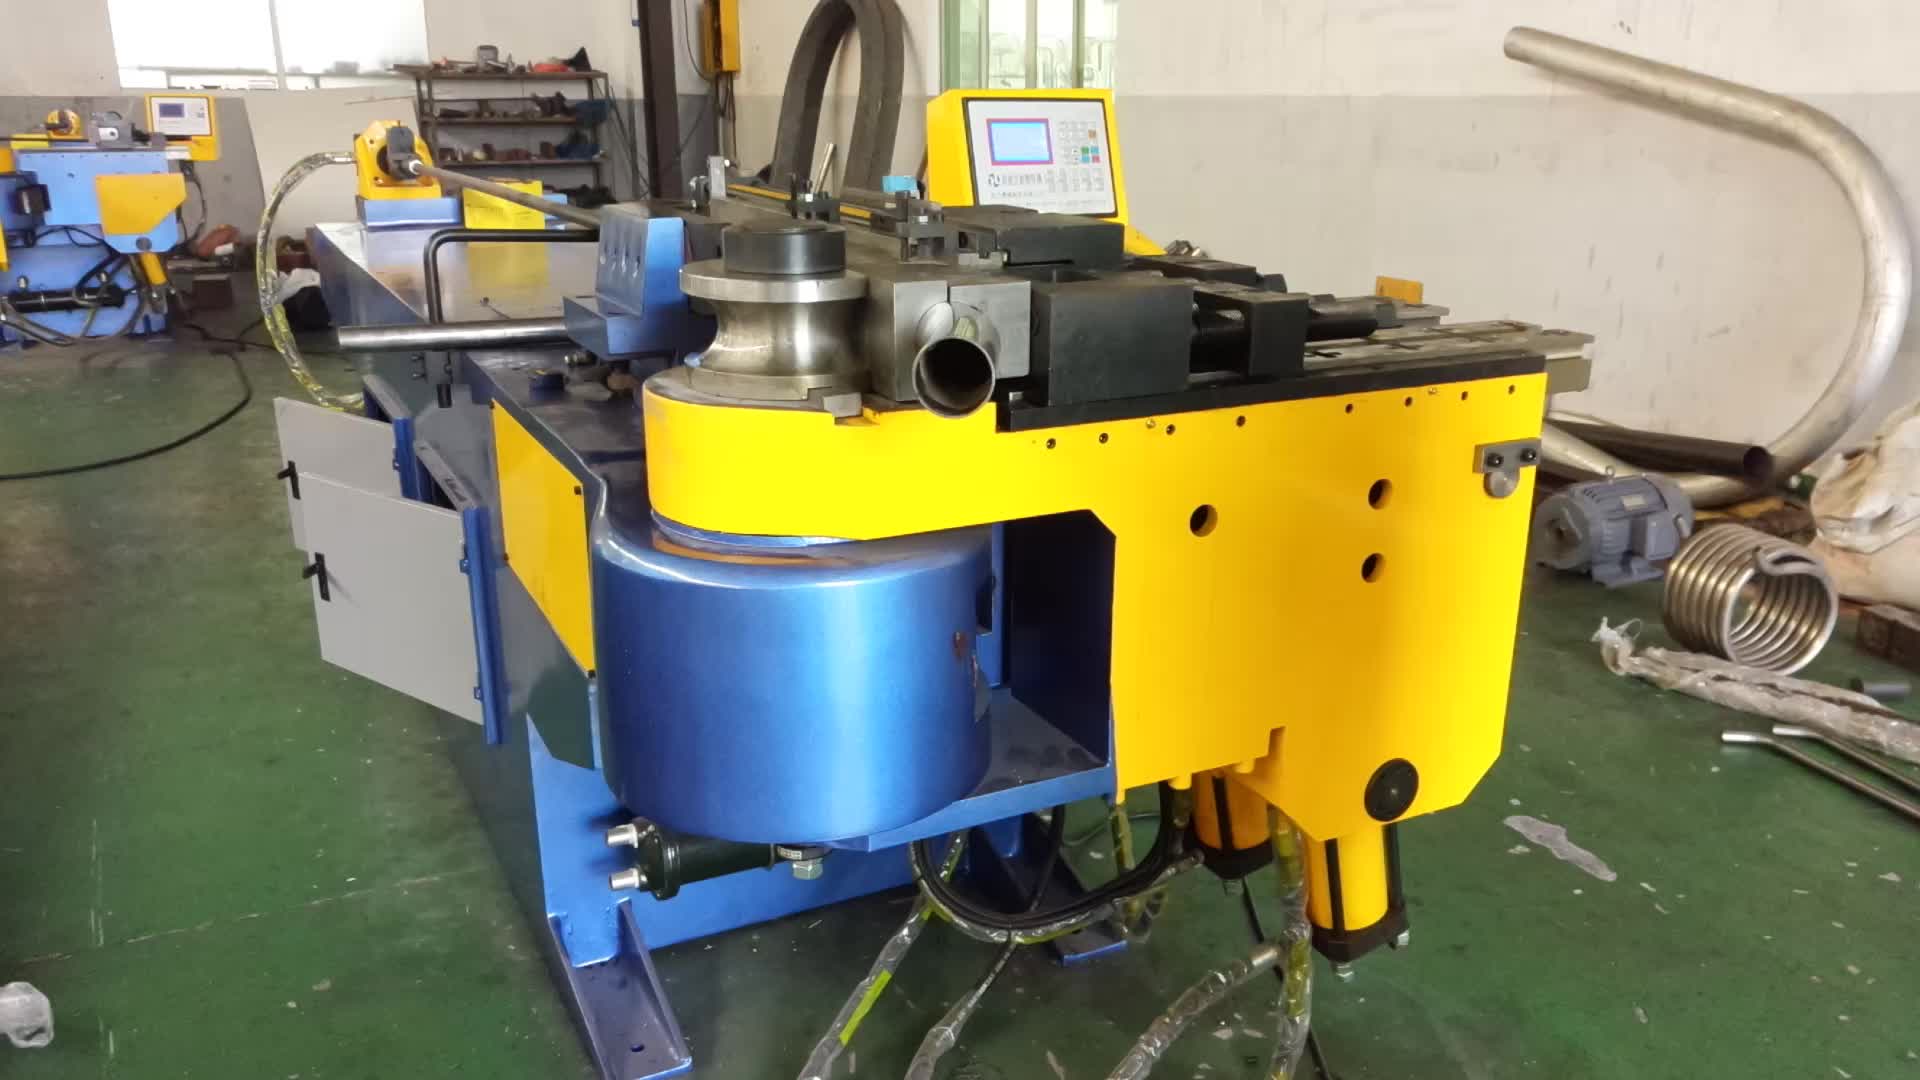 How to check the fault of pipe bending machine?